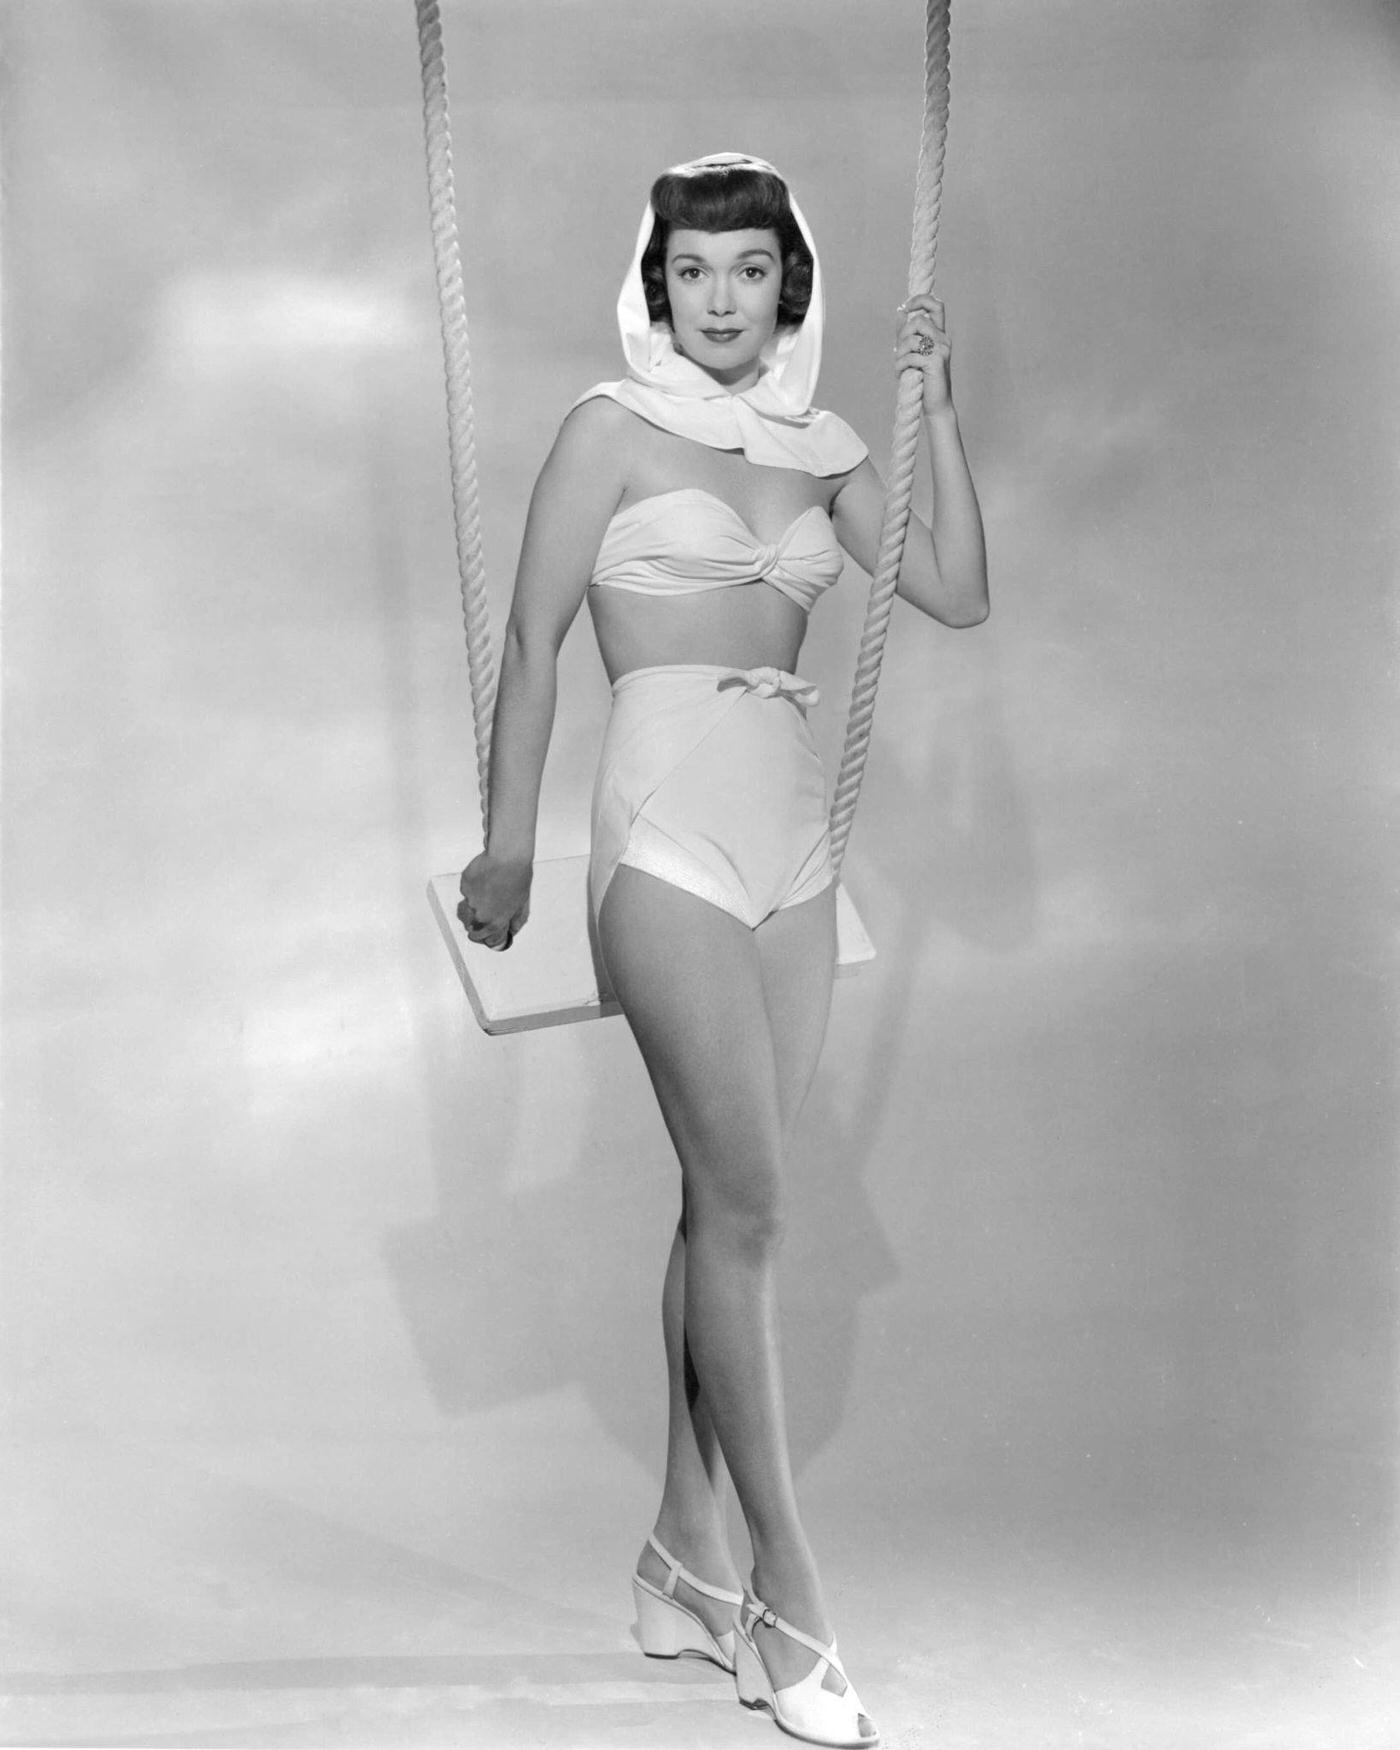 Jane Wyman, American actress and singer, leaning on a swing in a white two-piece swimsuit, 1945.